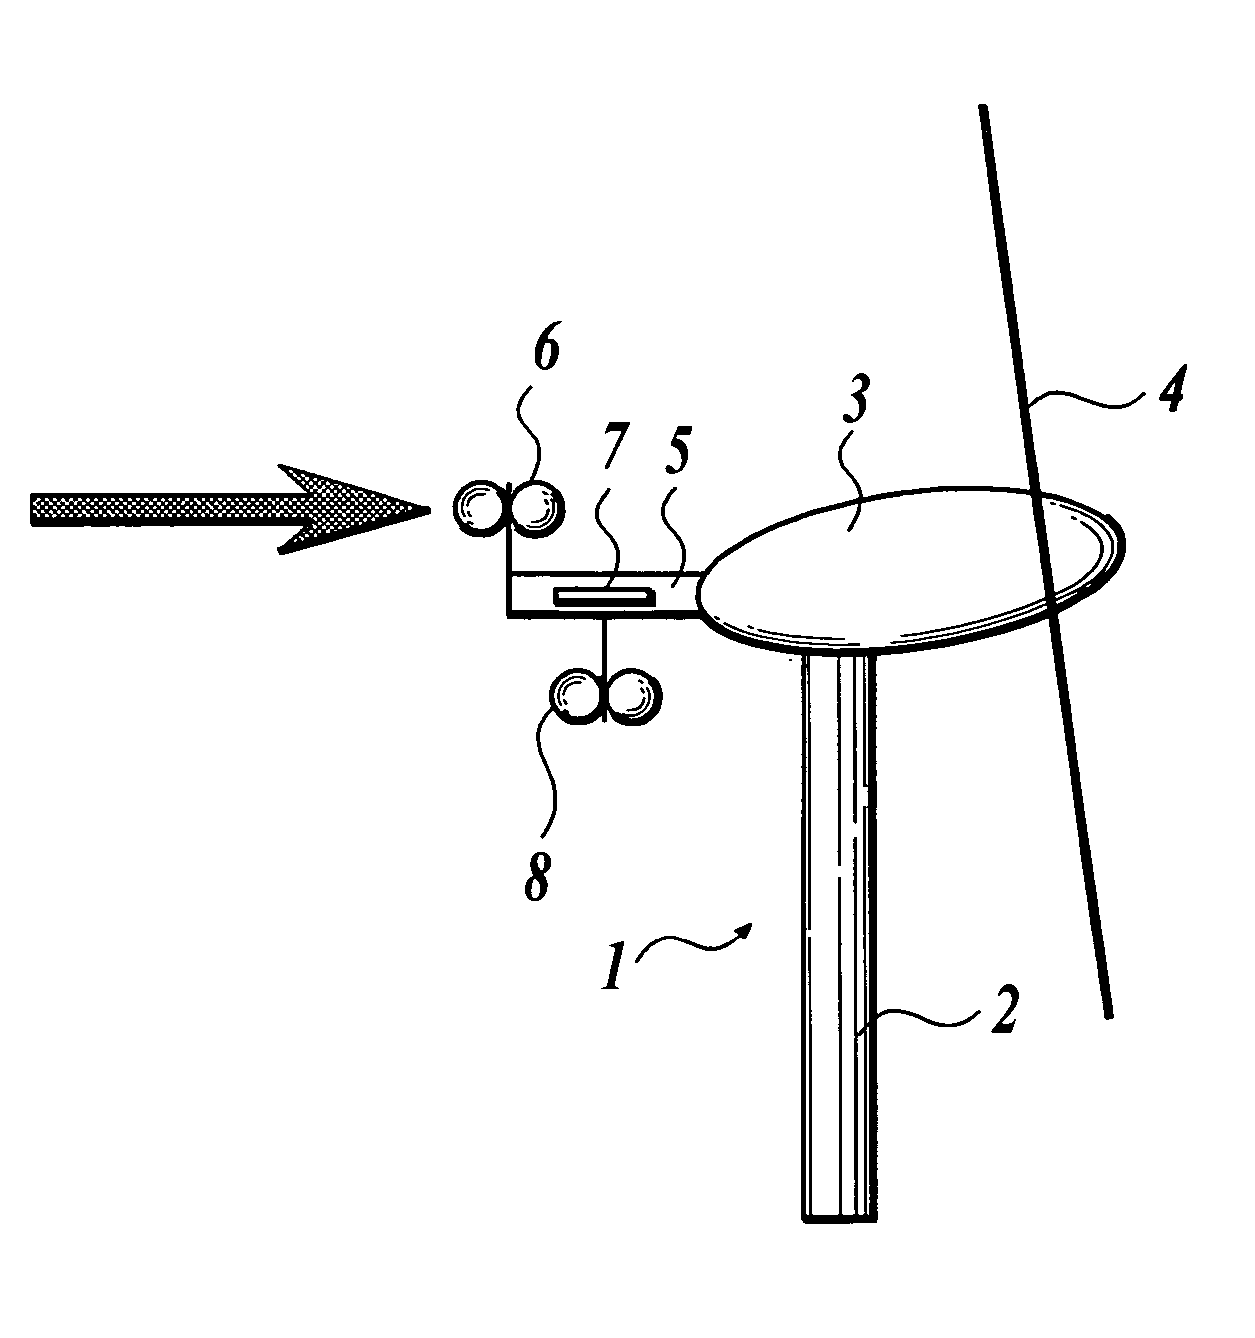 Horizontal axis wind turbine and method for measuring upflow angle